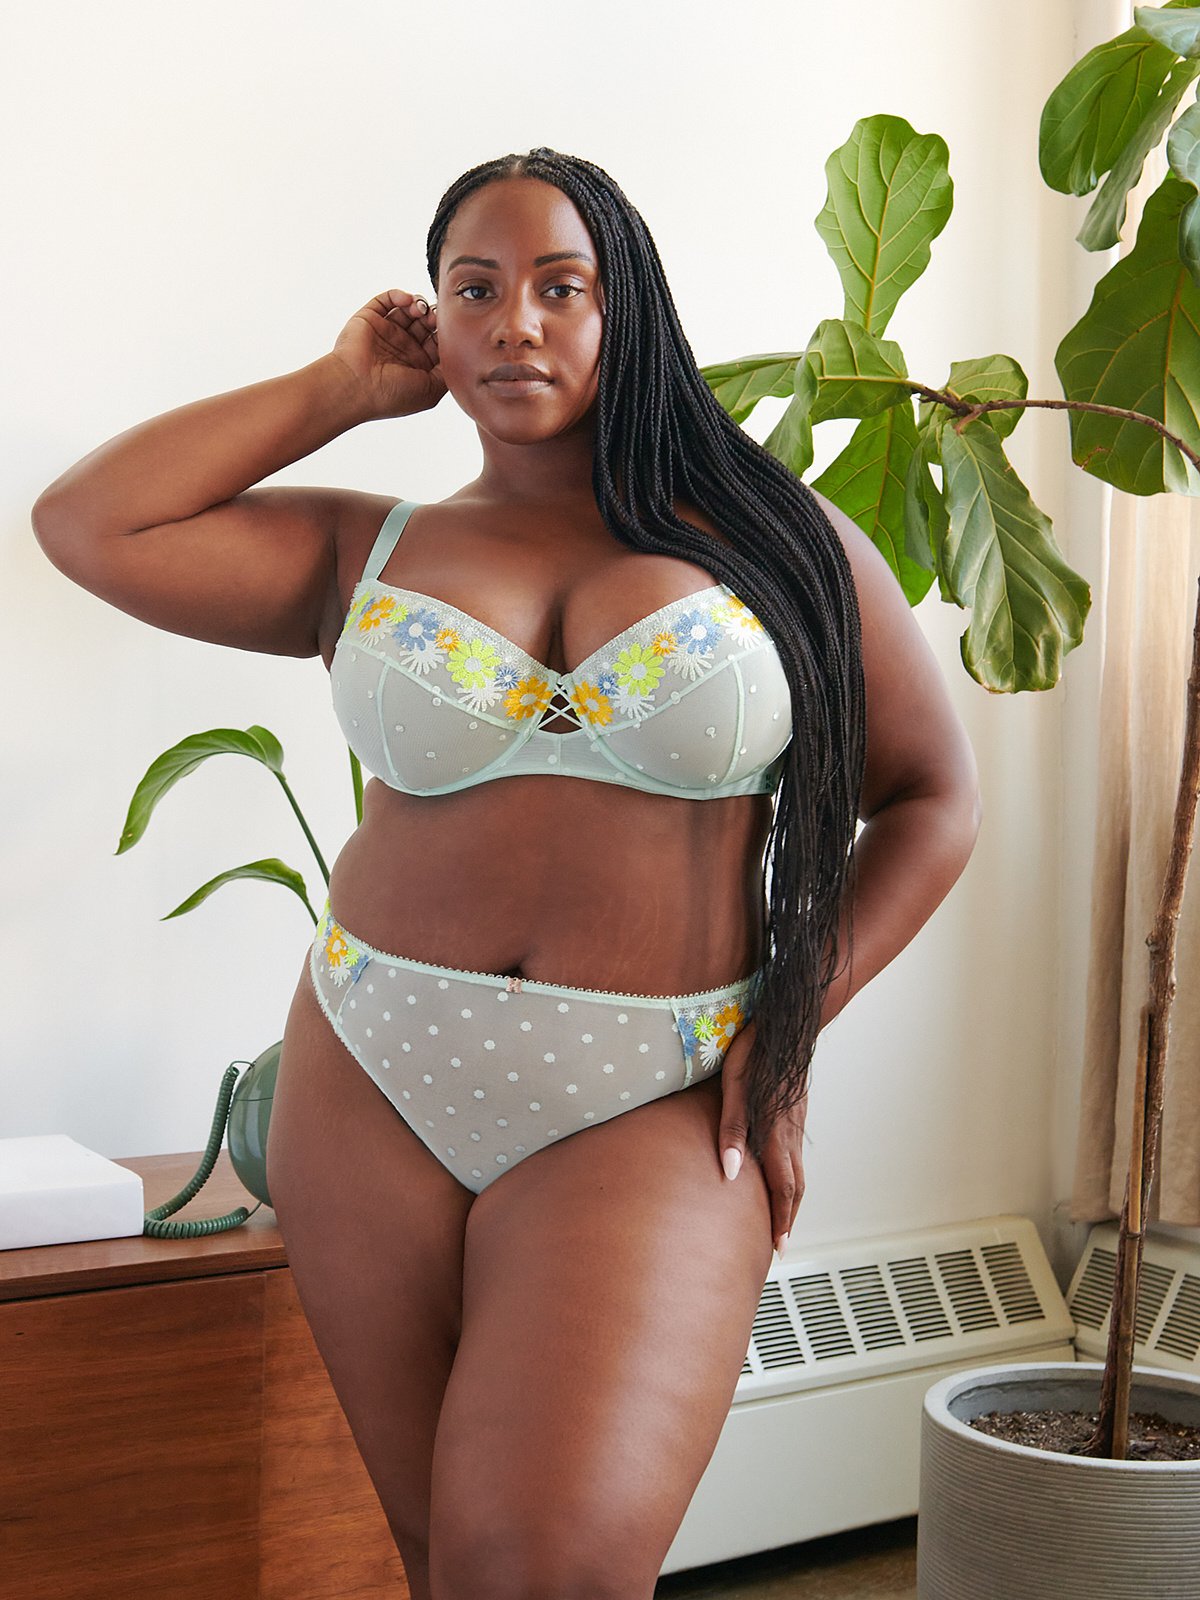 Free Spirit Floral Embroidered Unlined Balconette Bra